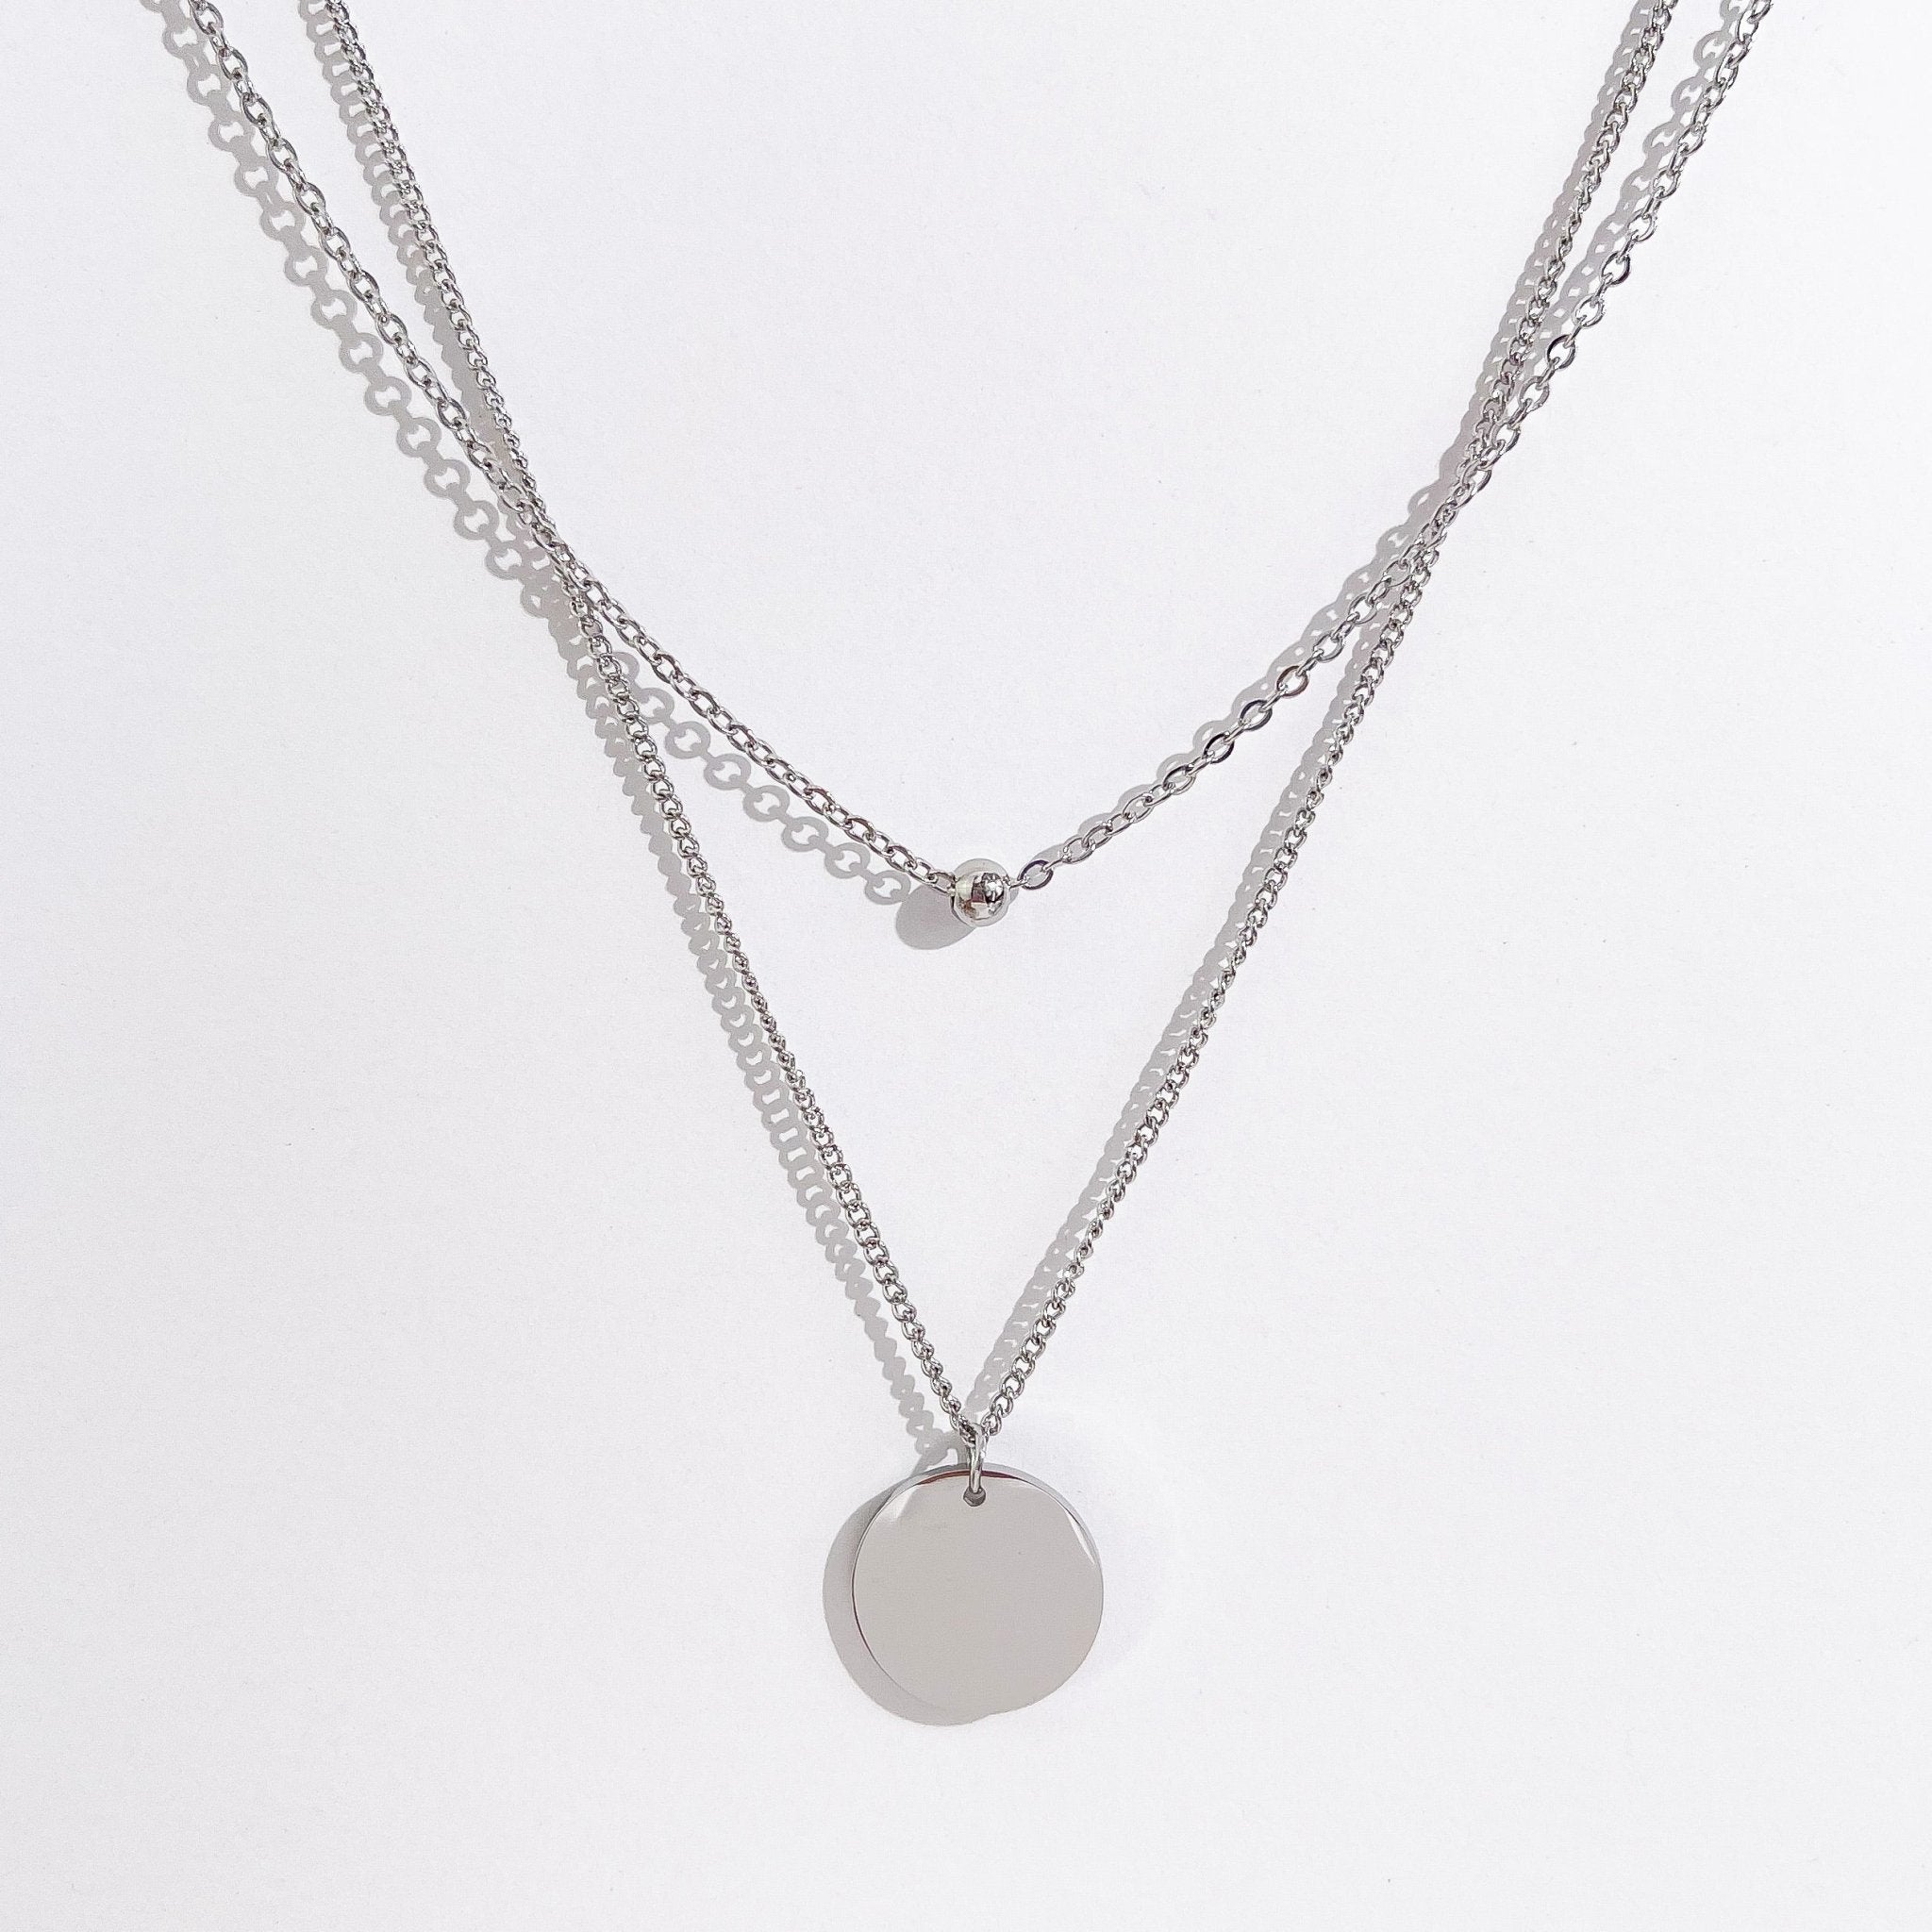 Customized Initial Layered Necklace - Flaire & Co.